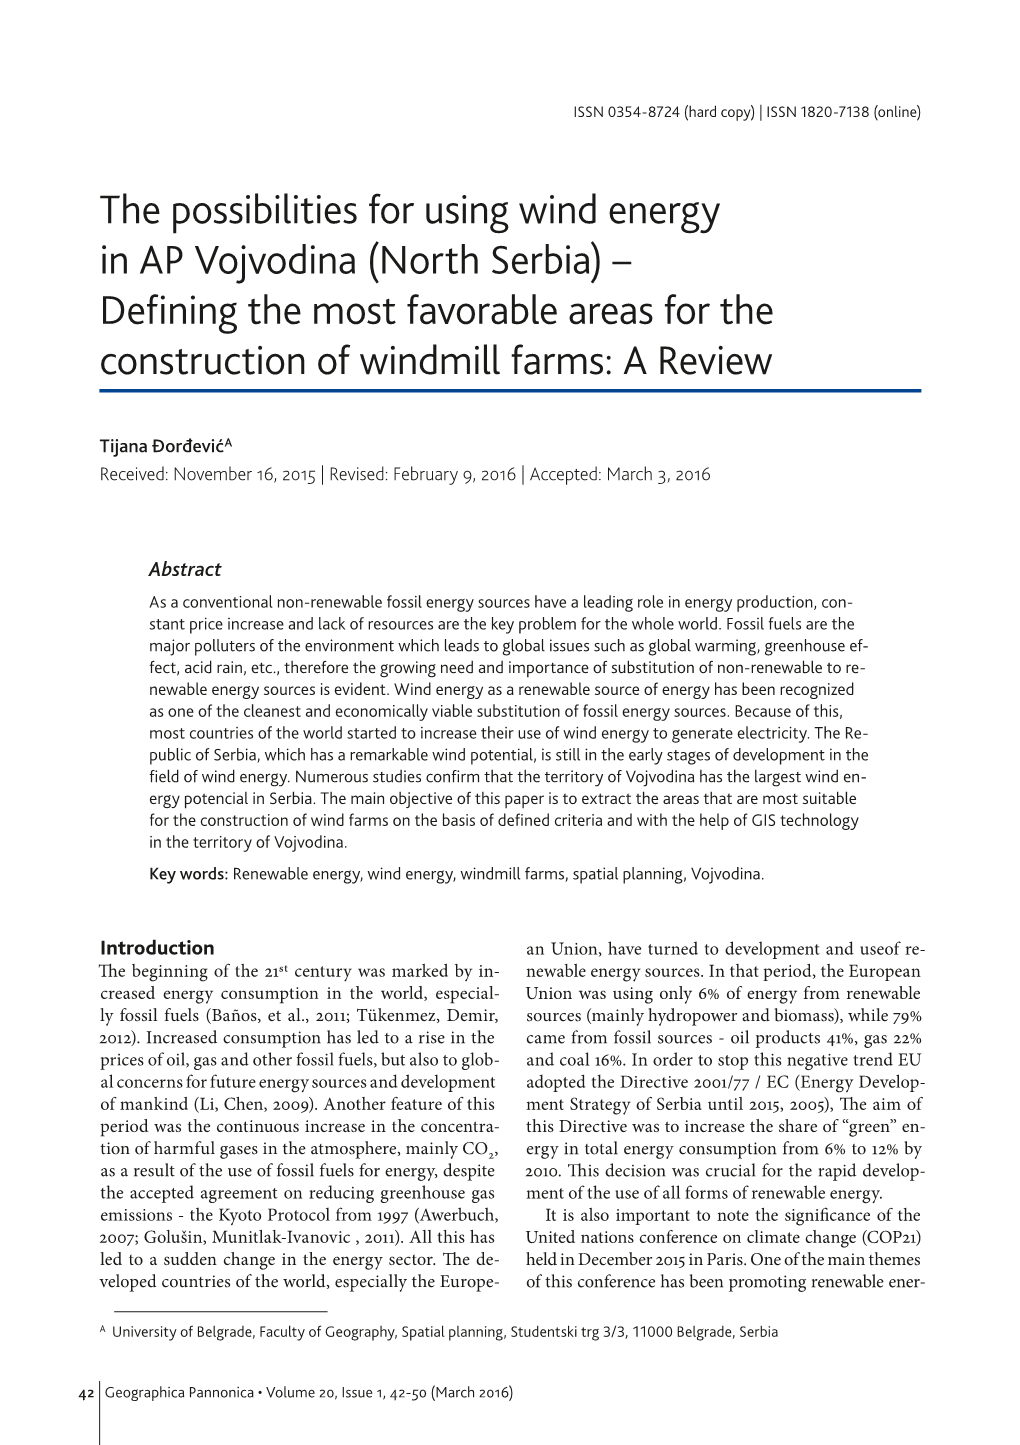 The Possibilities for Using Wind Energy in AP Vojvodina (North Serbia) – Defining the Most Favorable Areas for the Construction of Windmill Farms: a Review